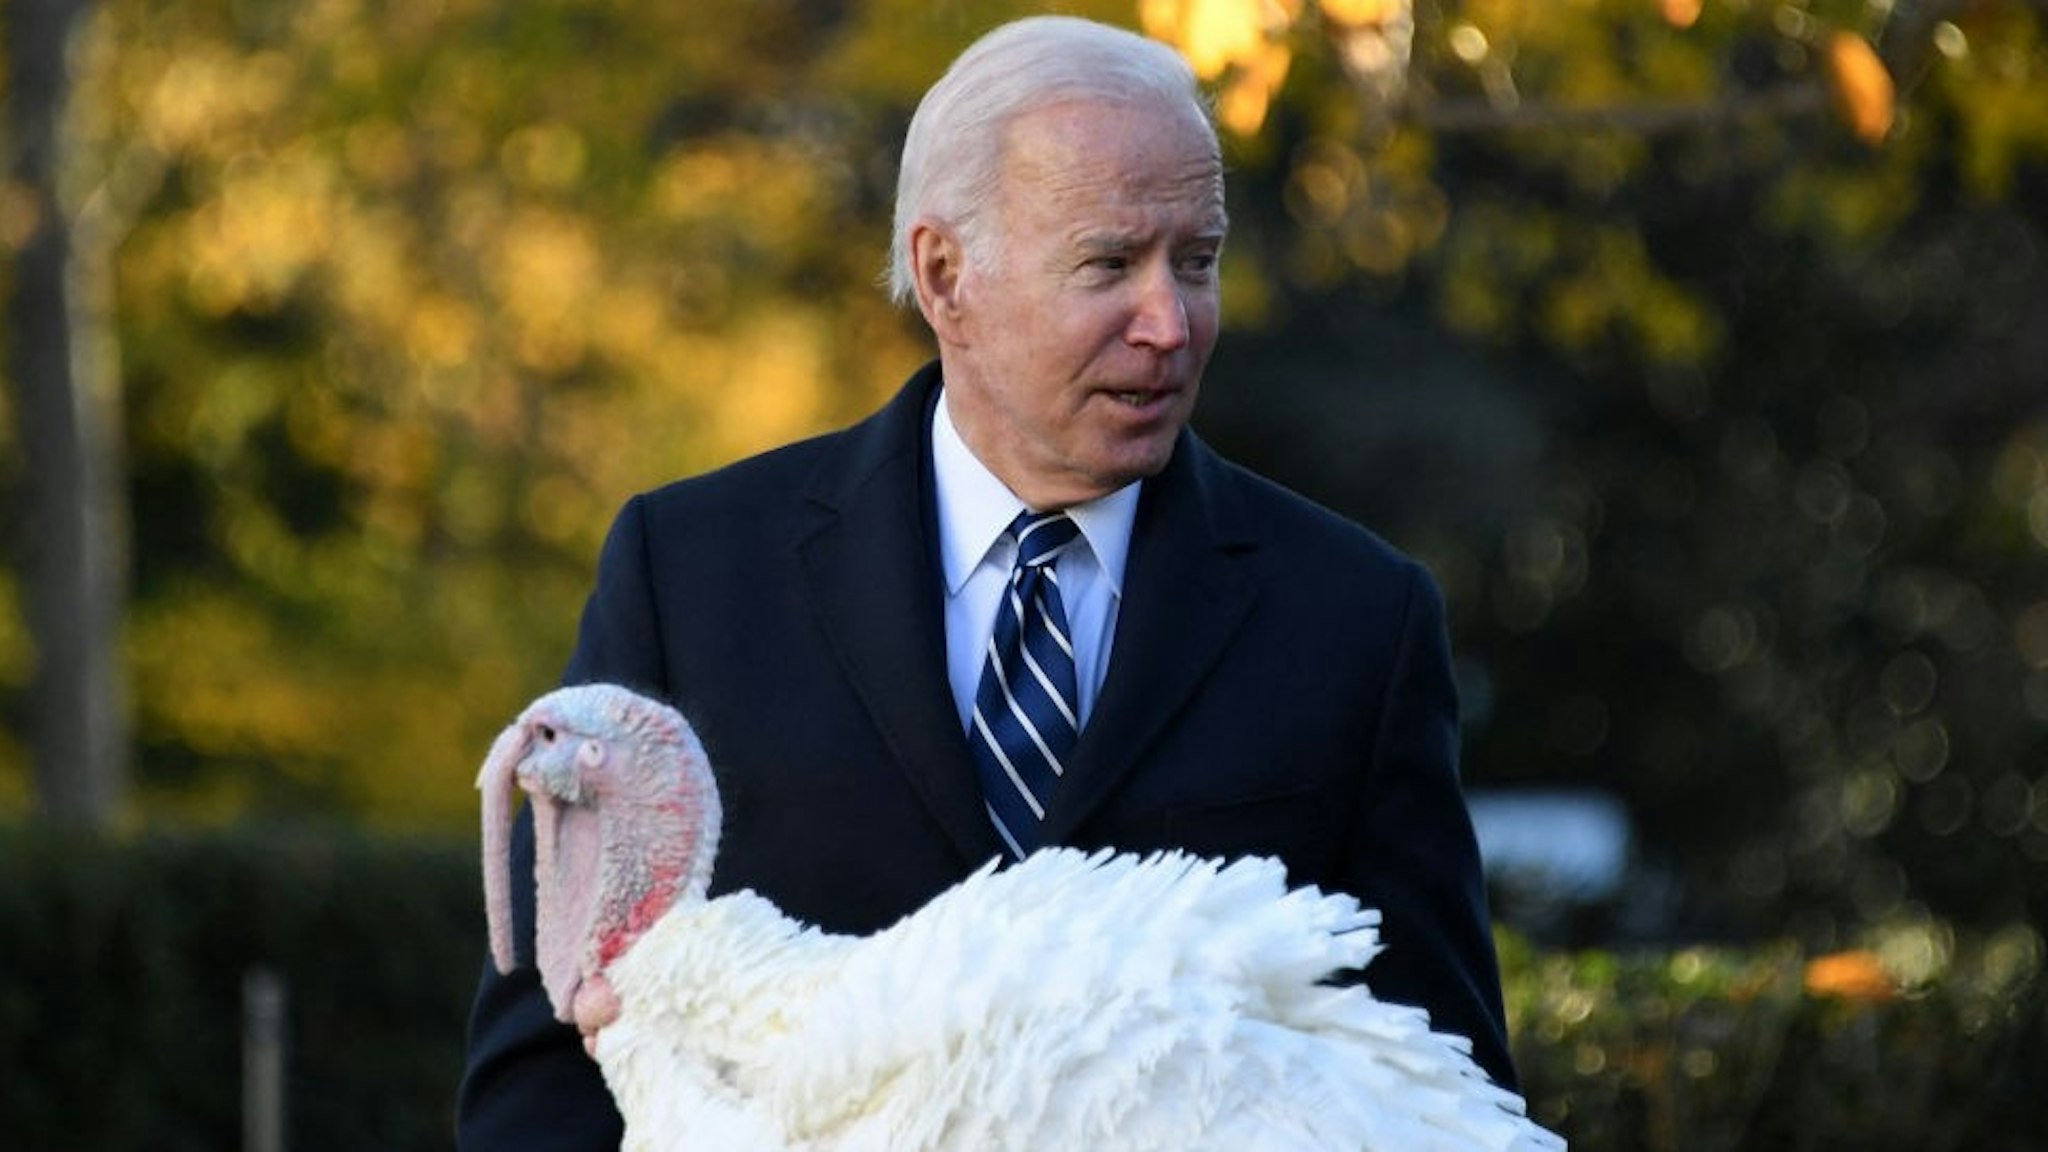 US President Joe Biden pardons the turkey 'Peanut Butter' during the White House Thanksgiving turkey pardon in the Rose Garden of the White House in Washington, DC on November 19, 2021. (Photo by OLIVIER DOULIERY / AFP) (Photo by